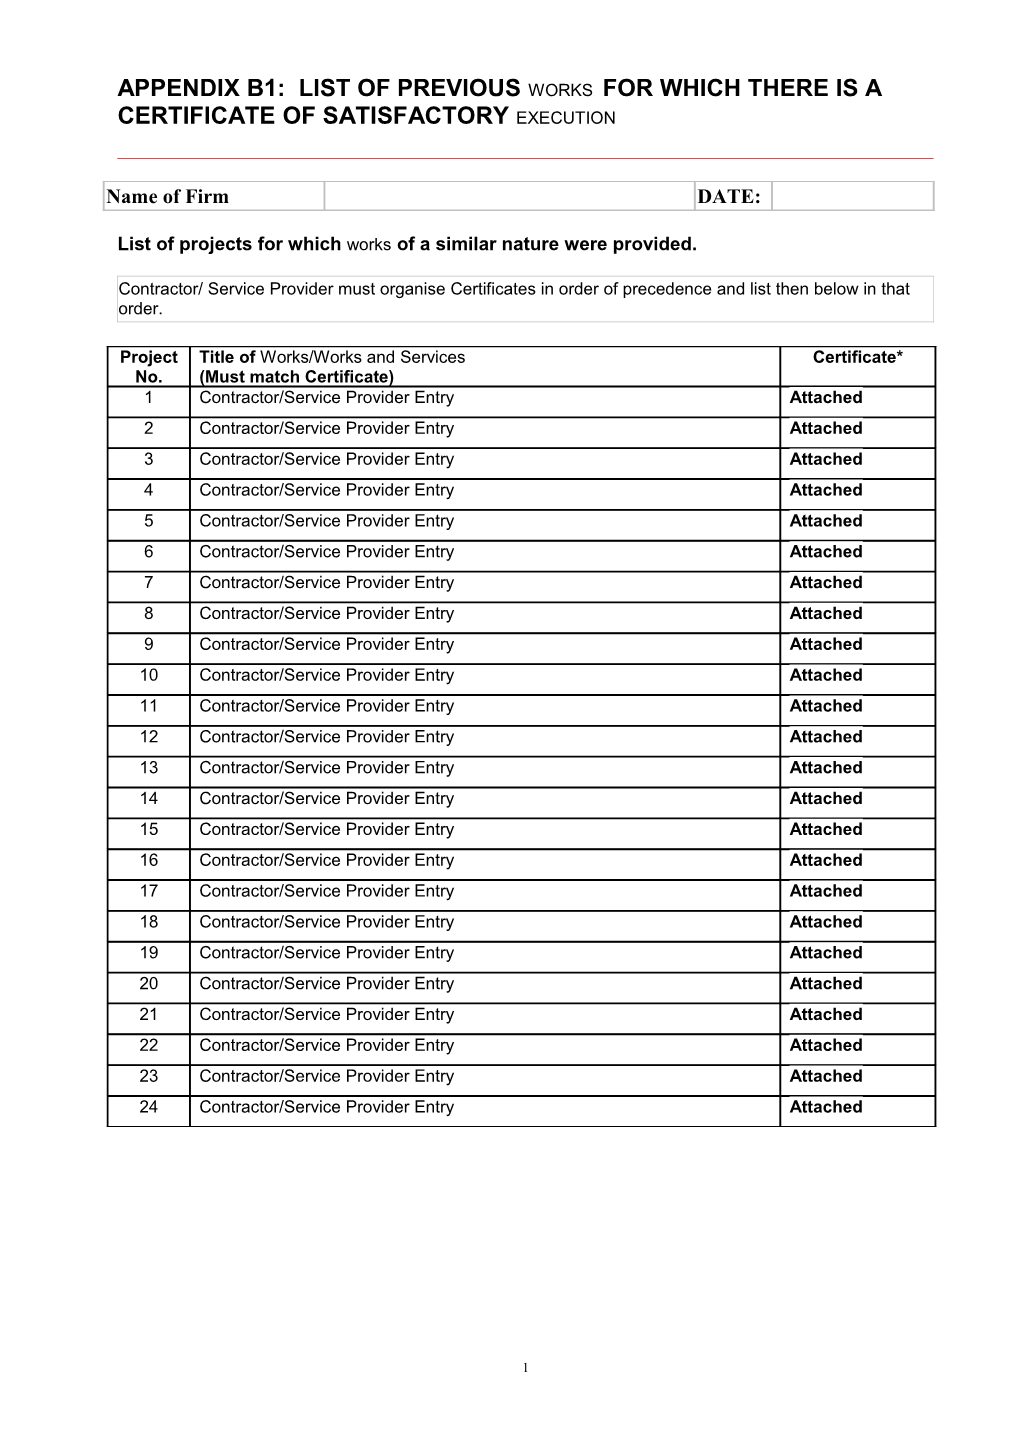 Appendix B: List of Previous Projects/Certificate of Satisfactory Execution